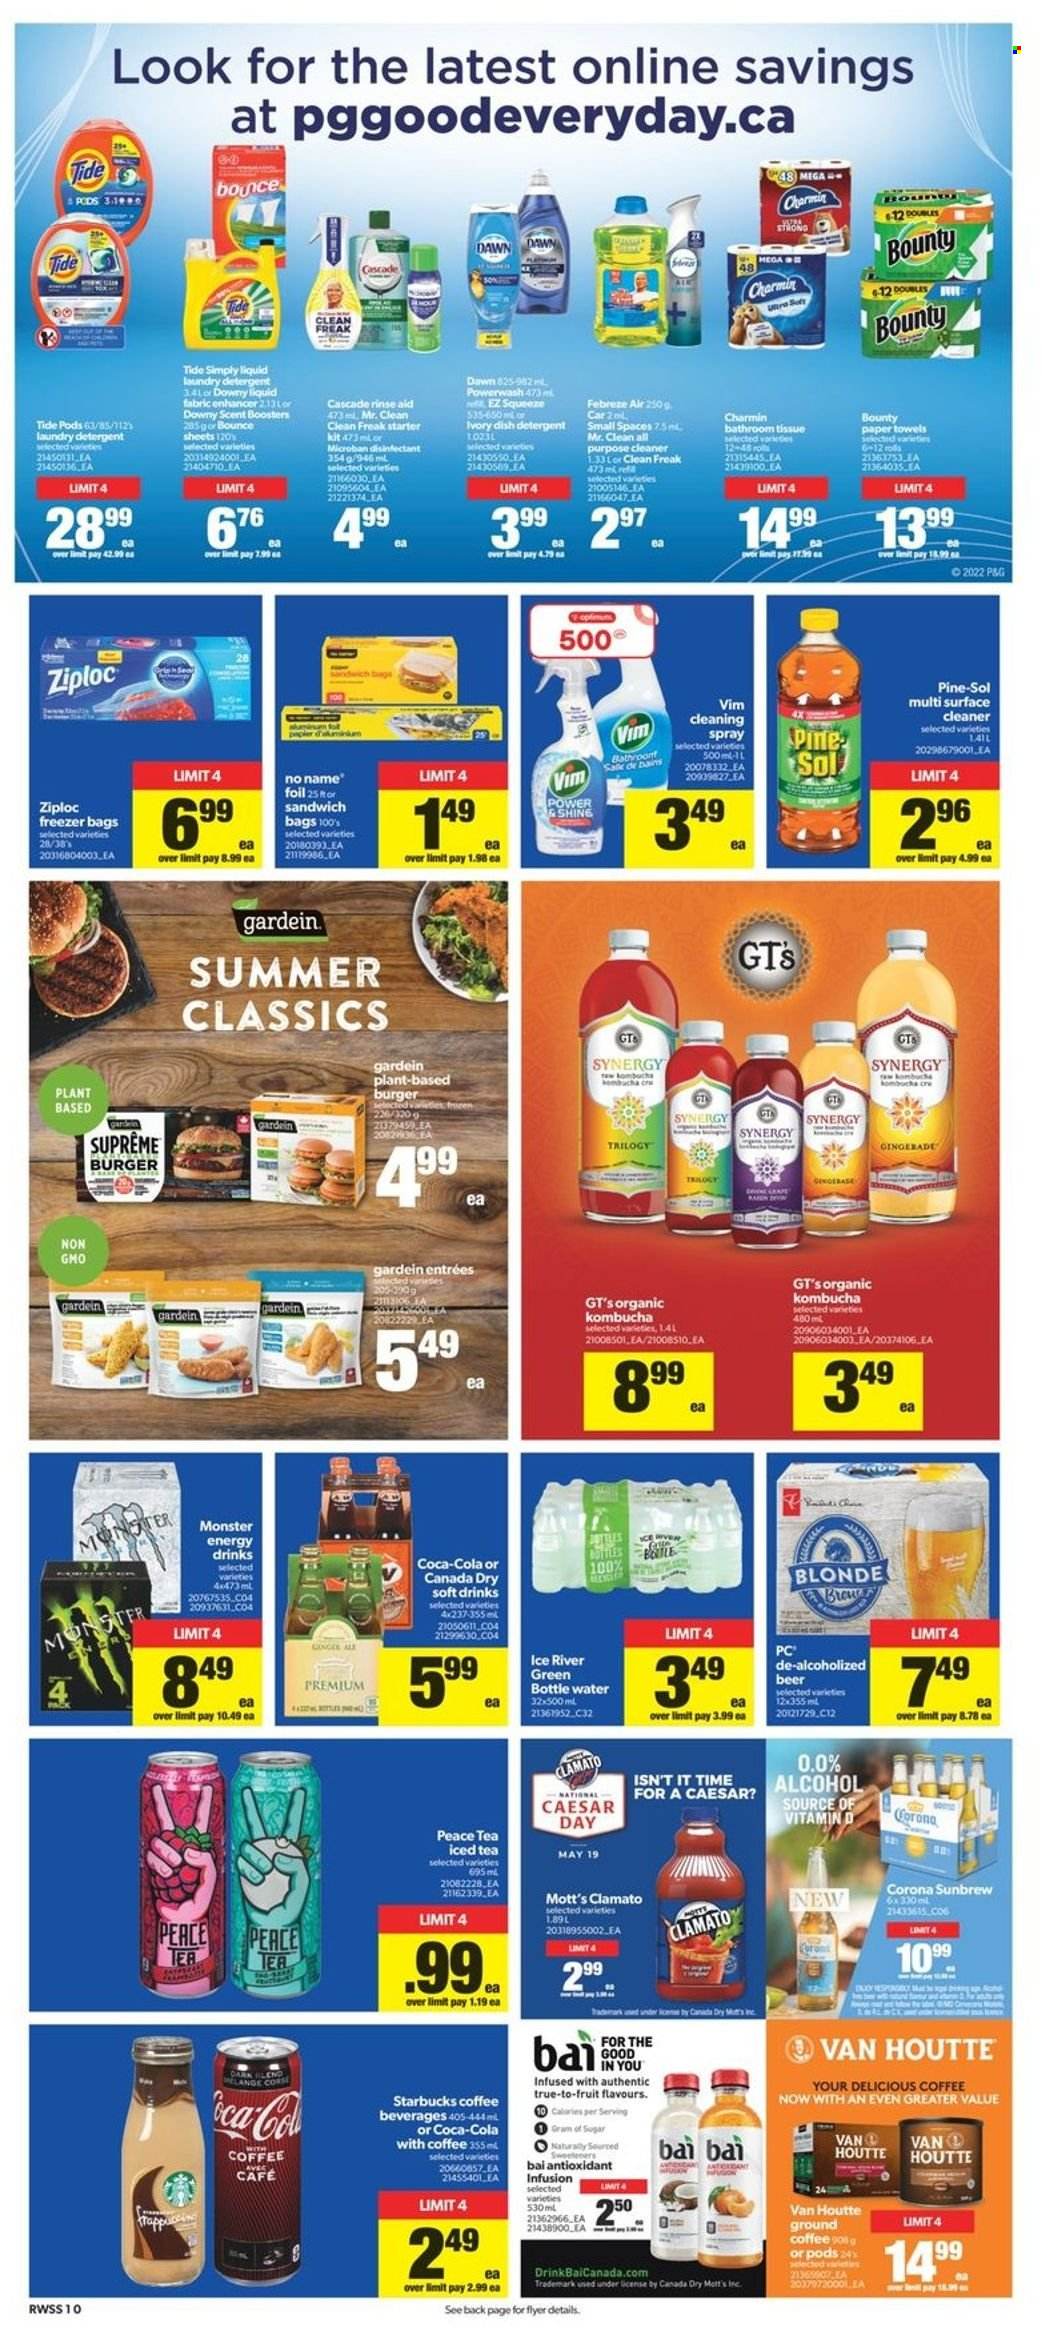 thumbnail - Real Canadian Superstore Flyer - May 19, 2022 - May 25, 2022 - Sales products - Mott's, No Name, hamburger, Bounty, sugar, Canada Dry, Coca-Cola, energy drink, Monster, ice tea, Clamato, soft drink, Bai, kombucha, coffee, ground coffee, Starbucks, beer, Corona Extra, bath tissue, kitchen towels, paper towels, Charmin, Febreze, surface cleaner, cleaner, all purpose cleaner, Pine-Sol, Tide, laundry detergent, Bounce, Cascade, scent booster, Downy Laundry, Ziploc, freezer bag, detergent, desinfection. Page 10.